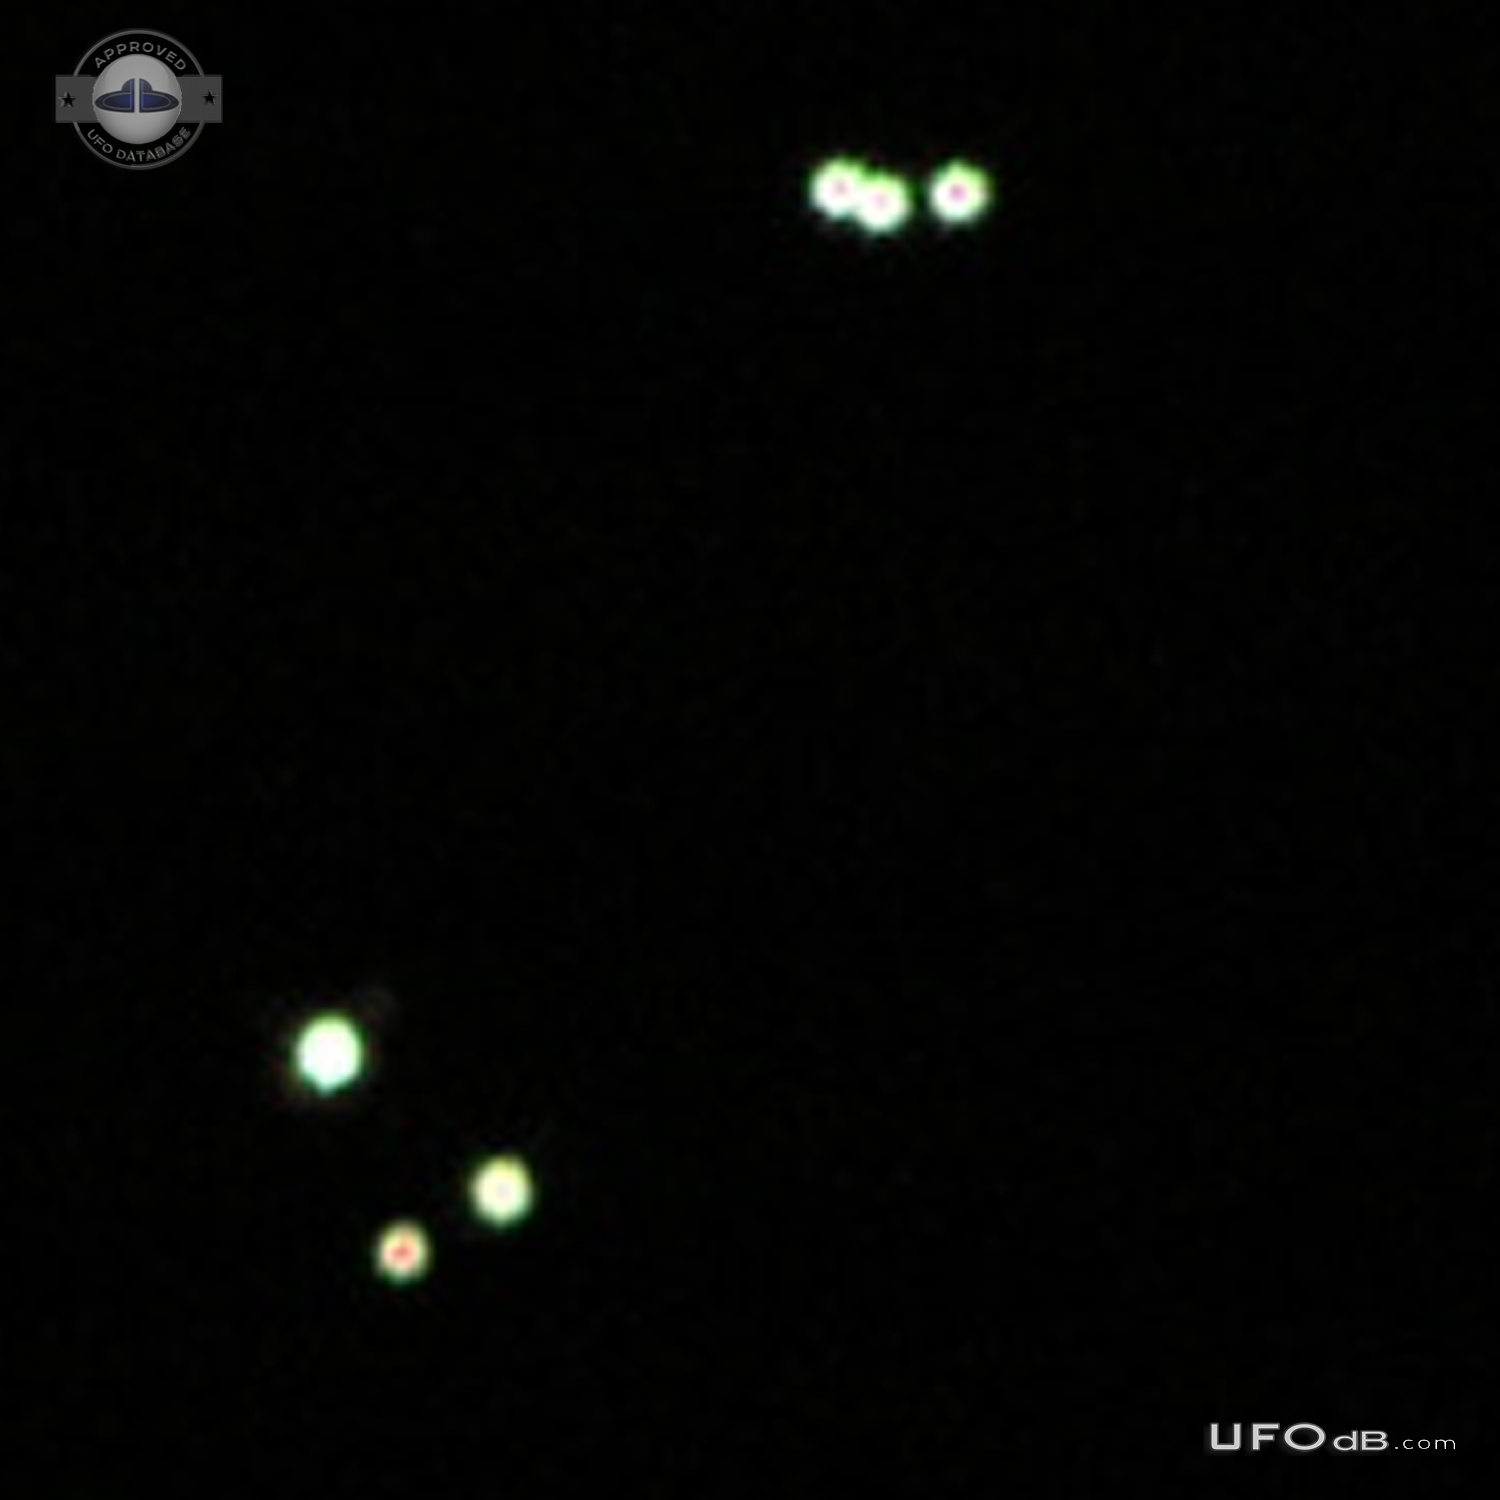 Multiple UFOs alternately flashing and circling each other in groups - UFO Picture #712-1